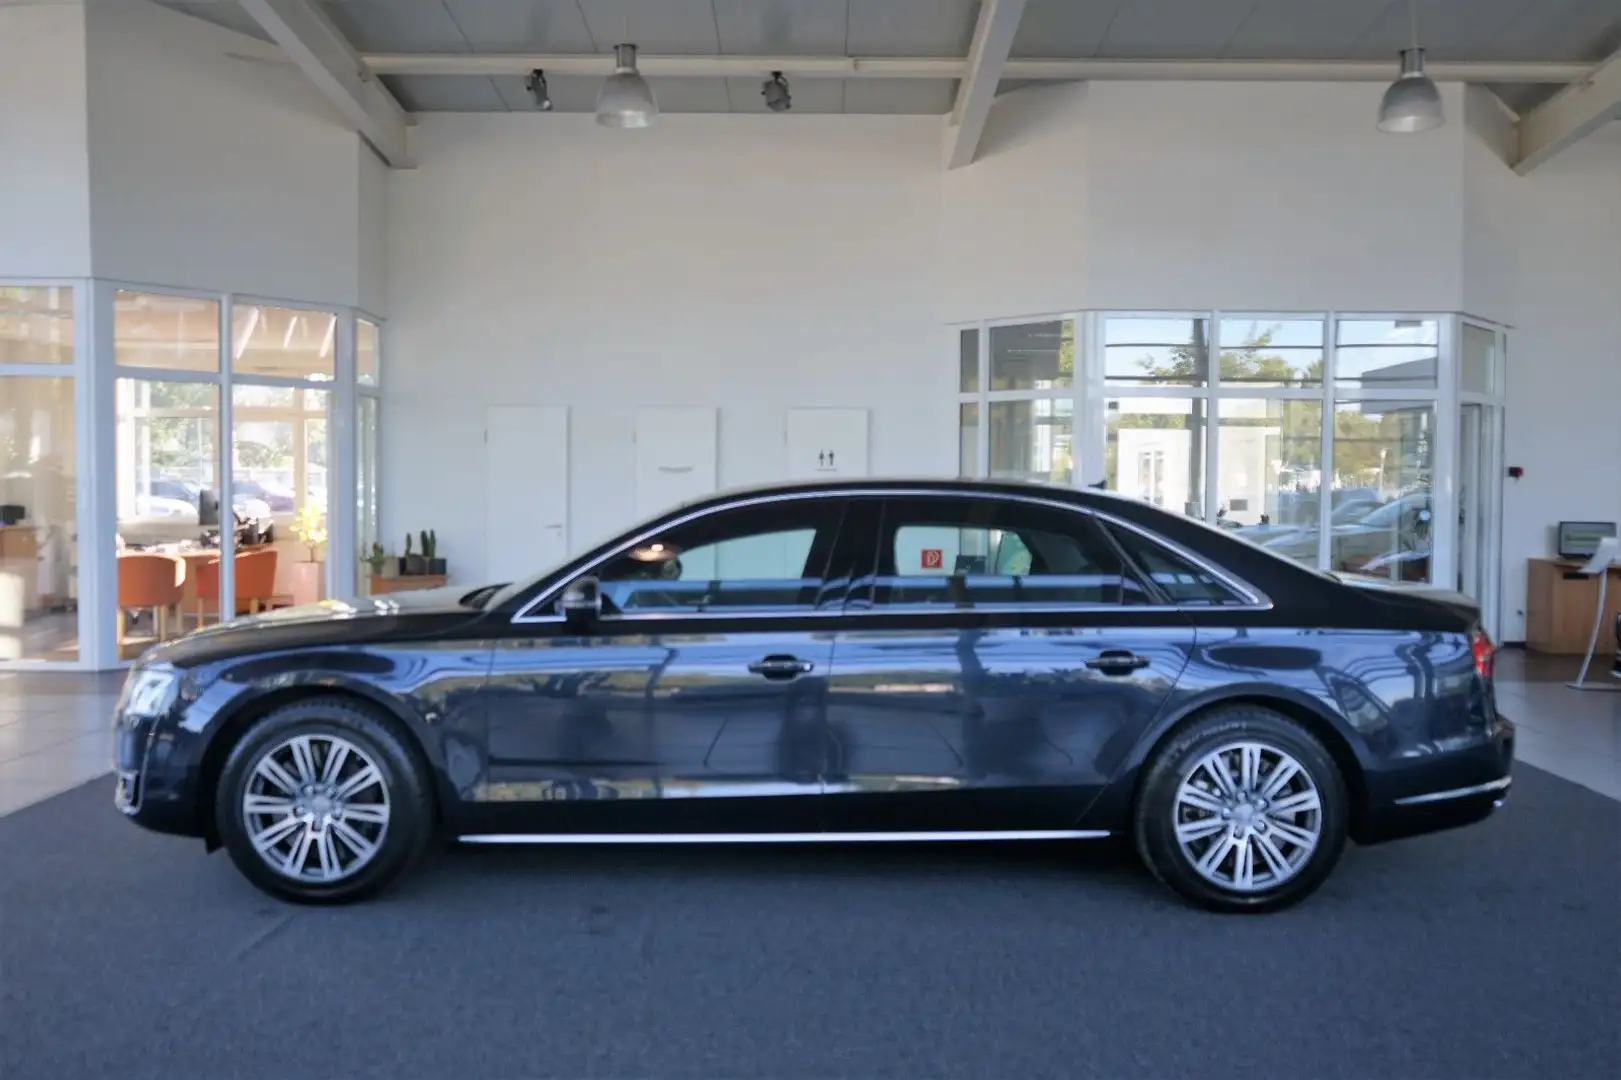 Audi A8 6.3 W12 Security Armored Vehicle VR7/VR9 Schwarz - 2